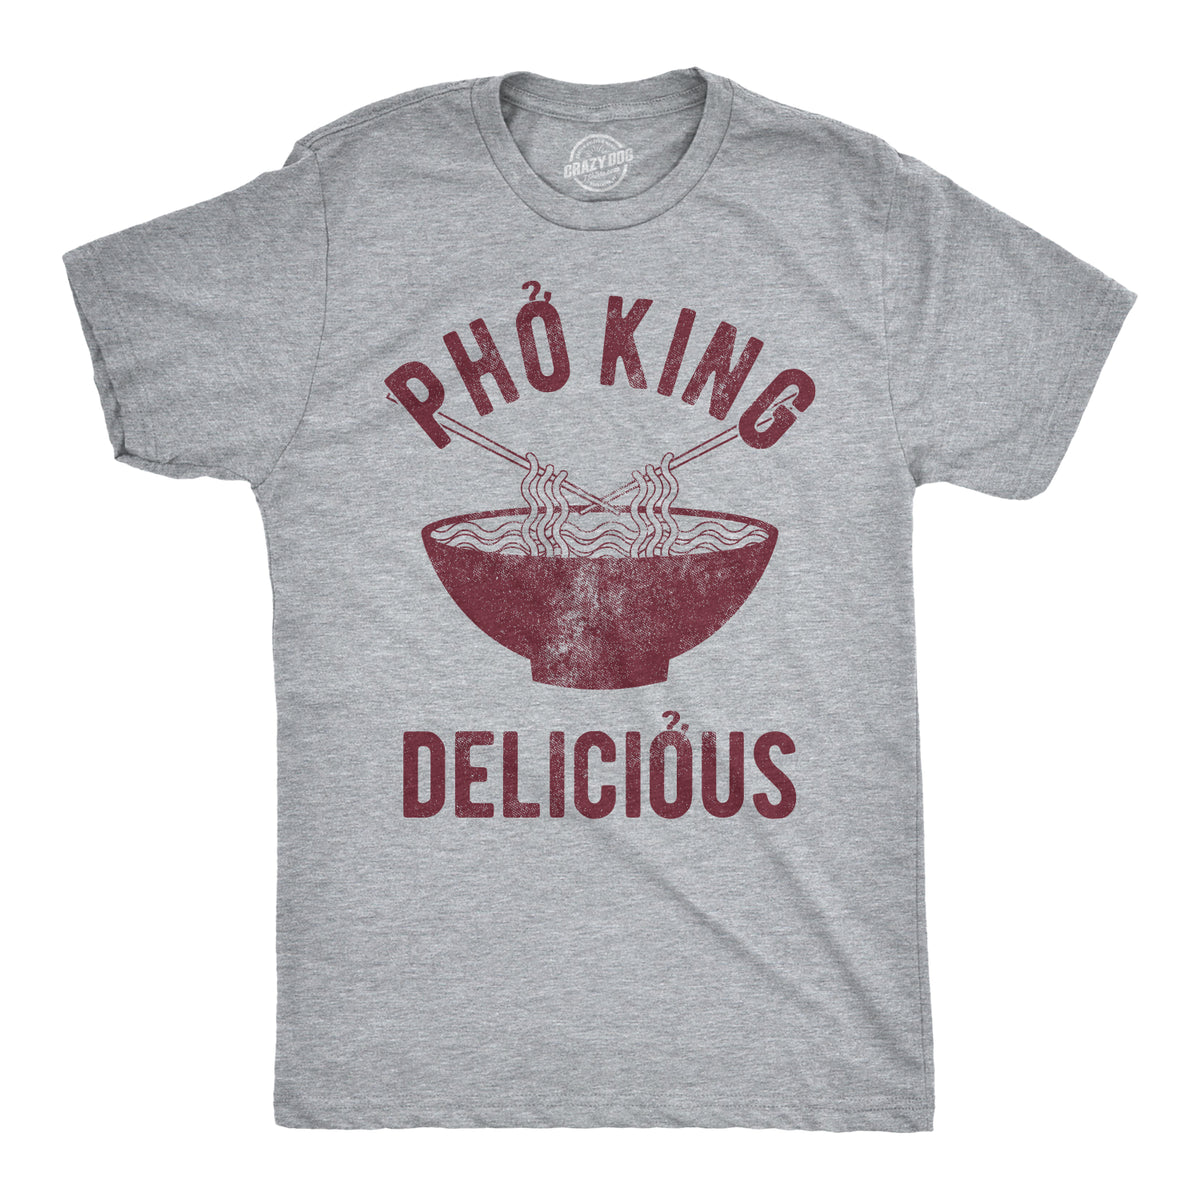 Funny Light Heather Grey - Pho King Pho King Delicious Mens T Shirt Nerdy food Tee